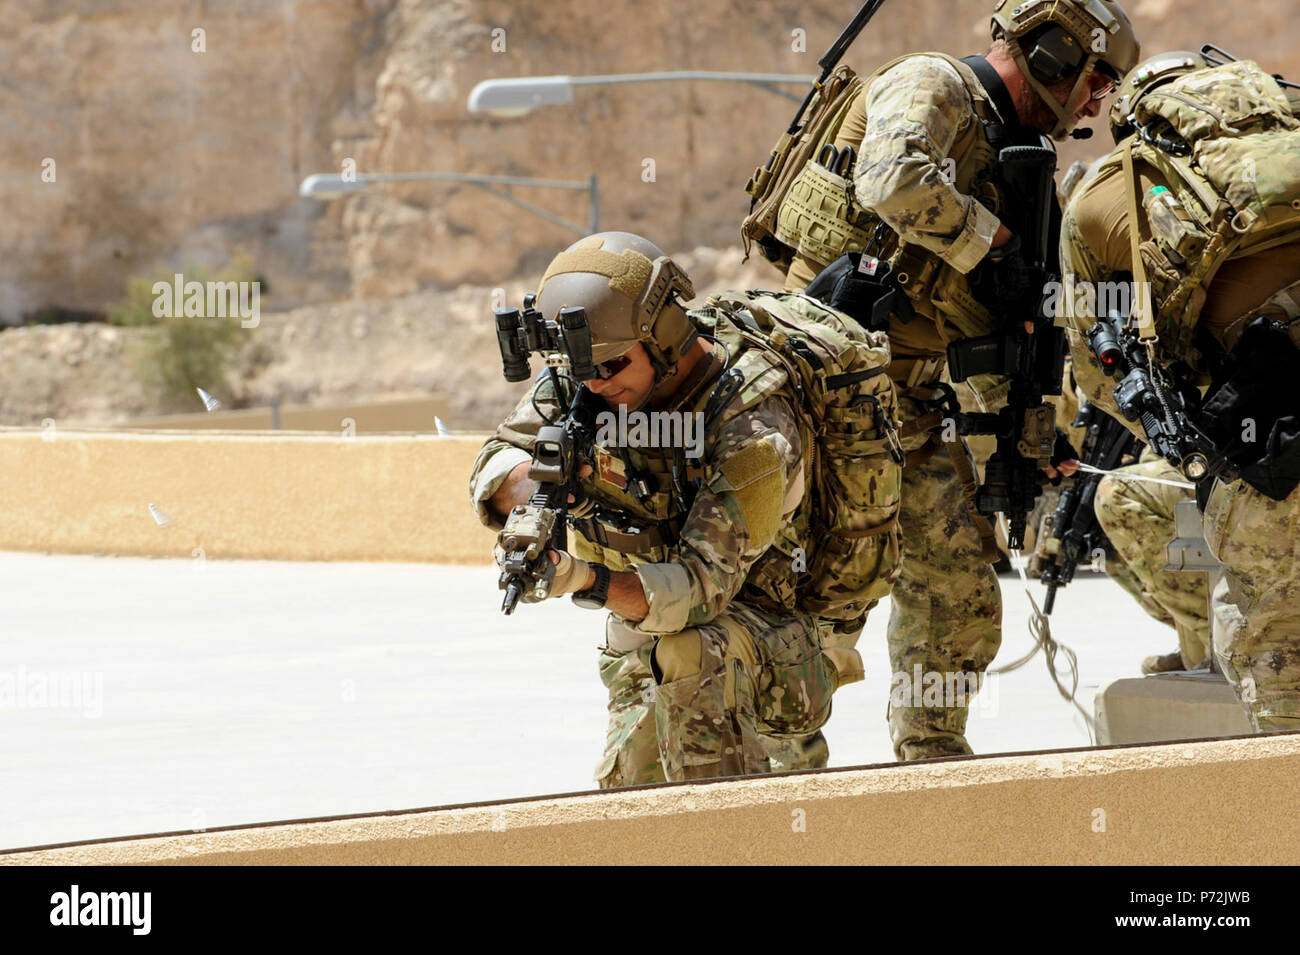 Jordan (May 11, 2017) An Airmen assigned to Air Force Special Operations, provides covering fire as forces fast rope drop on to a building, during an interoperability combat search and rescue training with Jordanian Armed Forces Special Task Force, at the King Abdullah II Special Operations Training Center, as part of Exercise Eager Lion. Eager Lion is an annual U.S. Central Command exercise in Jordan designed to strengthen military-to-military relationships between the U.S., Jordan and other international partners. This year's iteration is comprised of about 7,200 military personnel from more Stock Photo